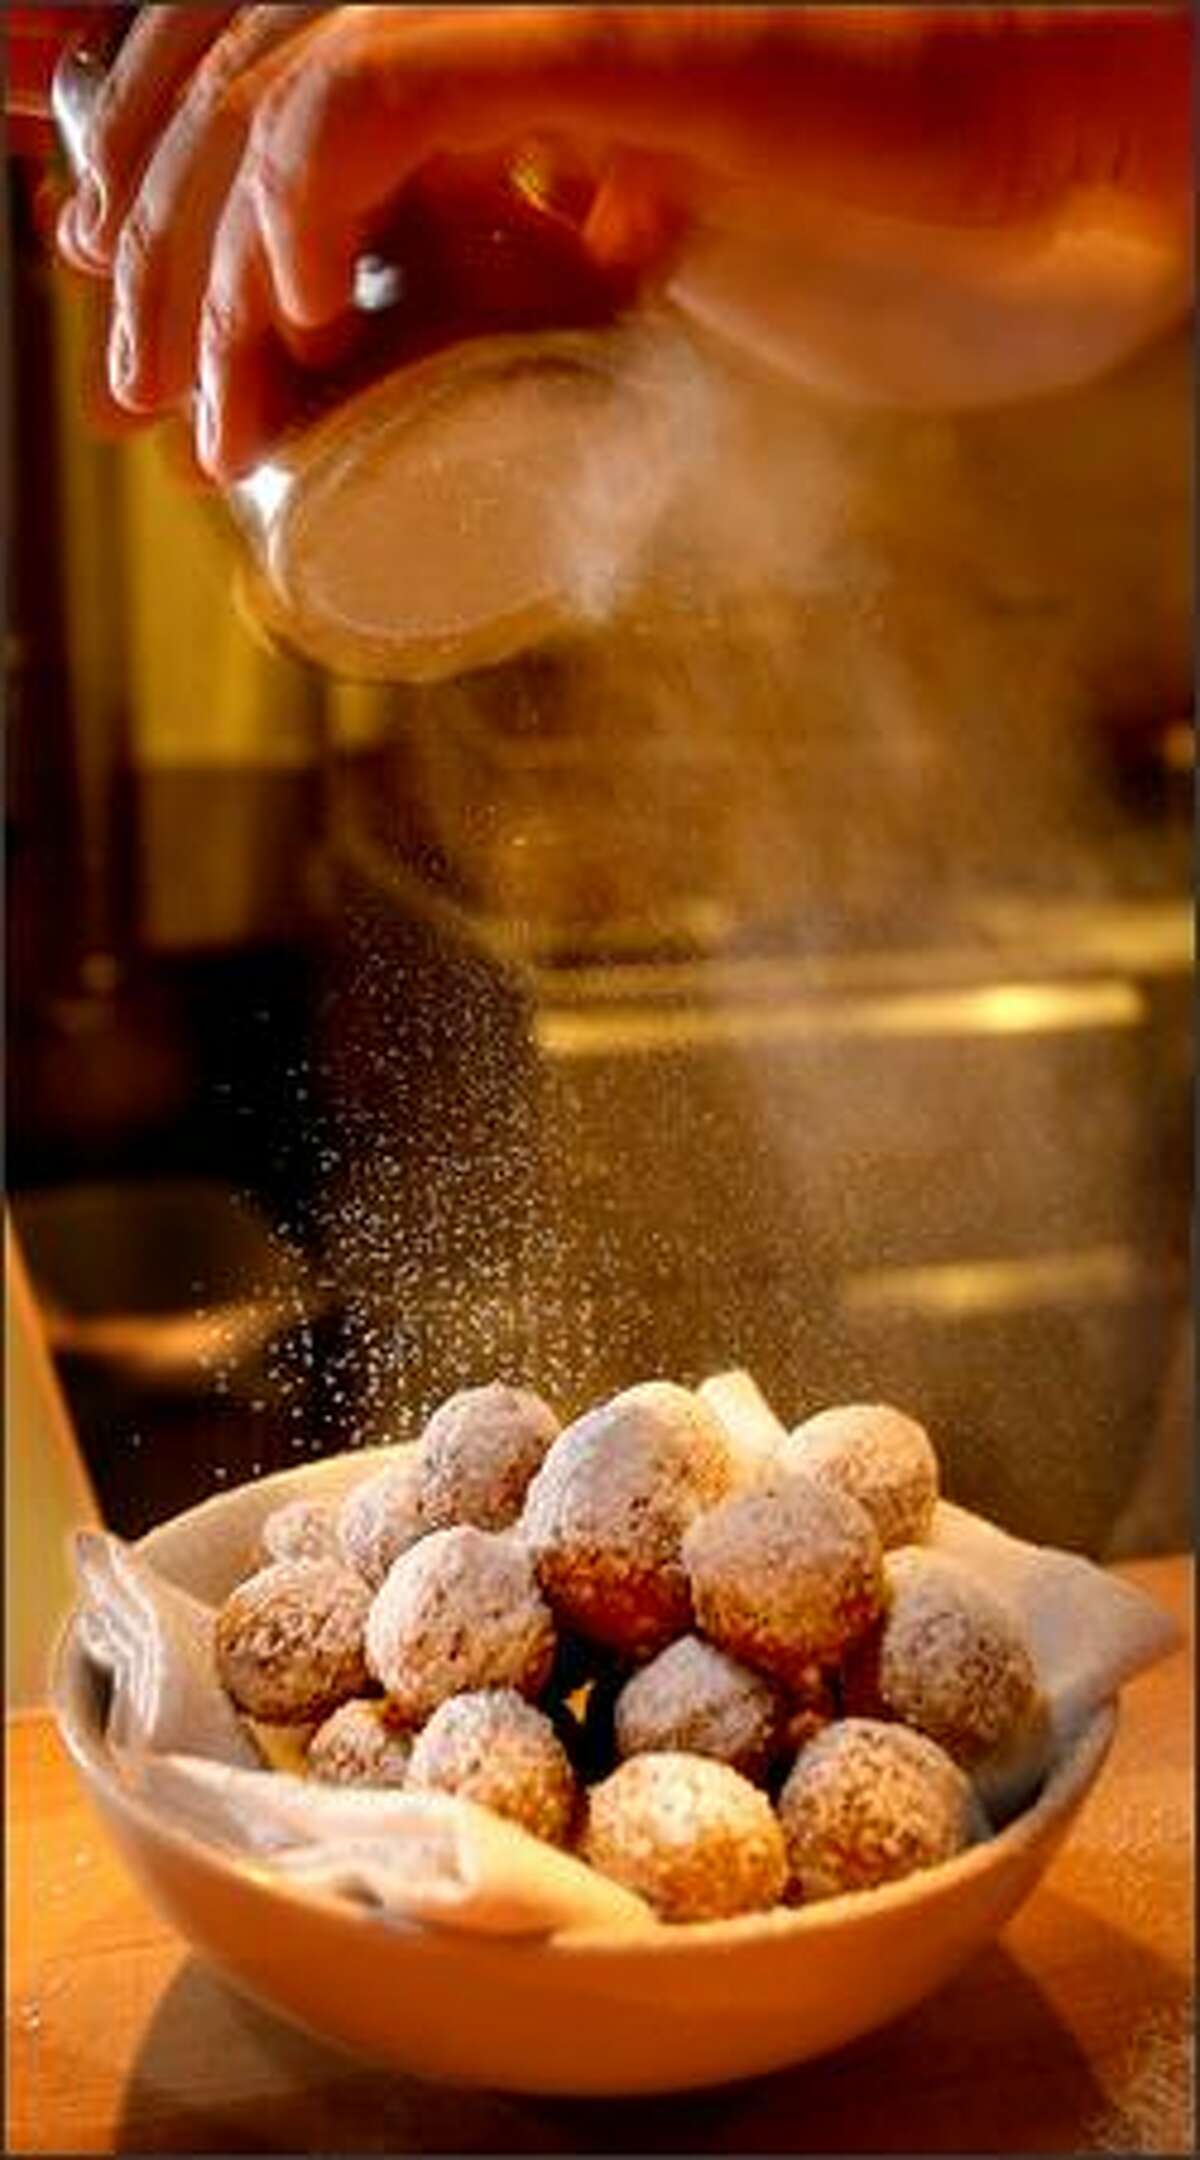 Powdered sugar is sprinkled on an order of zeppole, a generous mound of lemony doughnut holes.